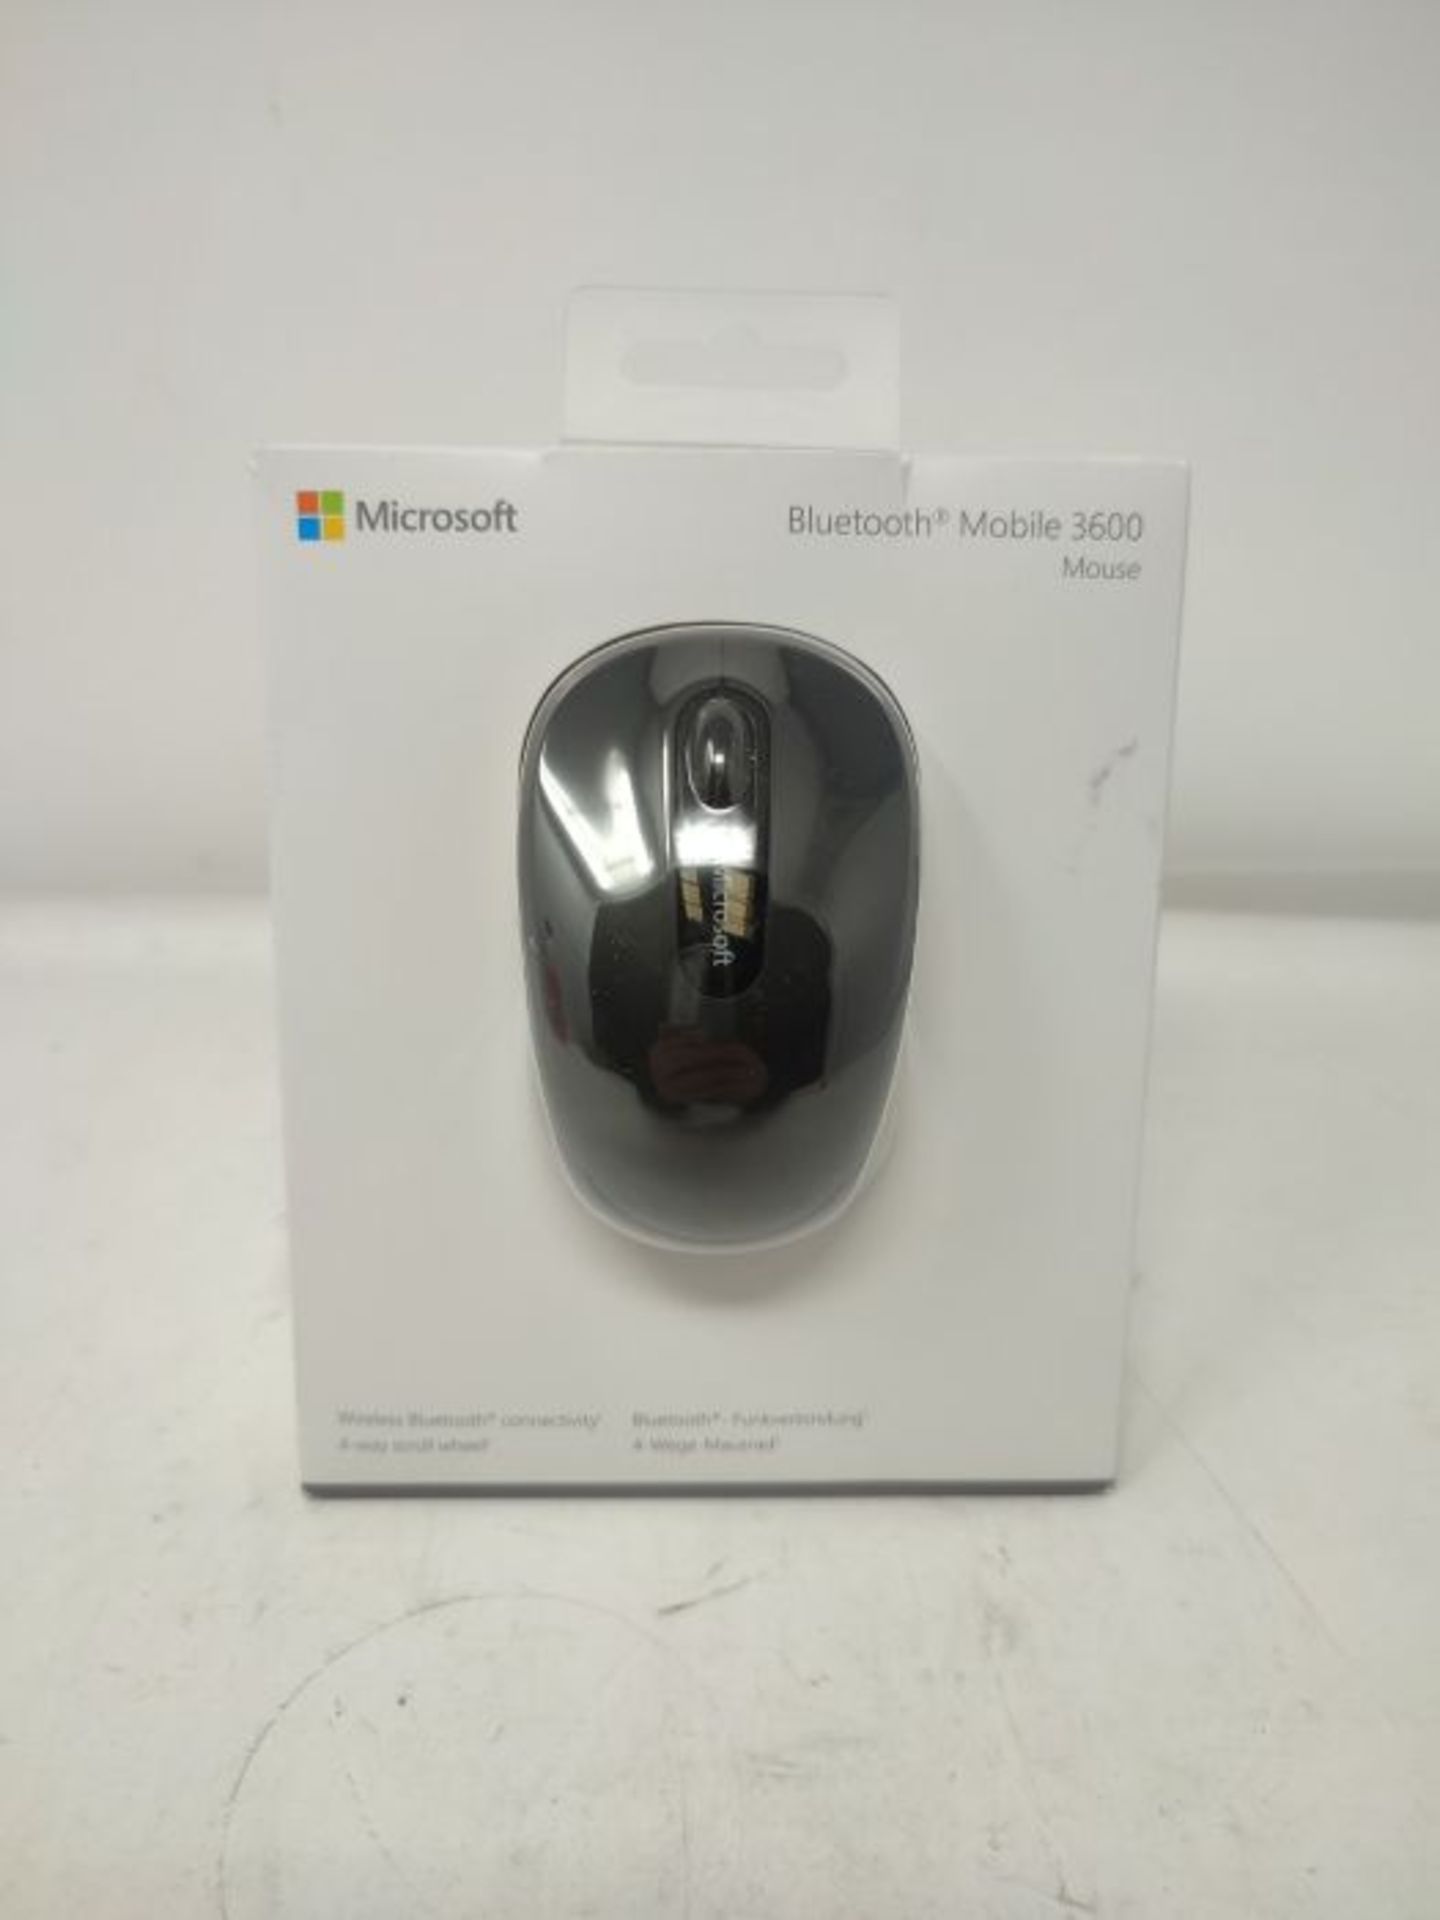 Microsoft PN7-00003 Bluetooth Mobile Mouse 3600 - Black - Image 2 of 3